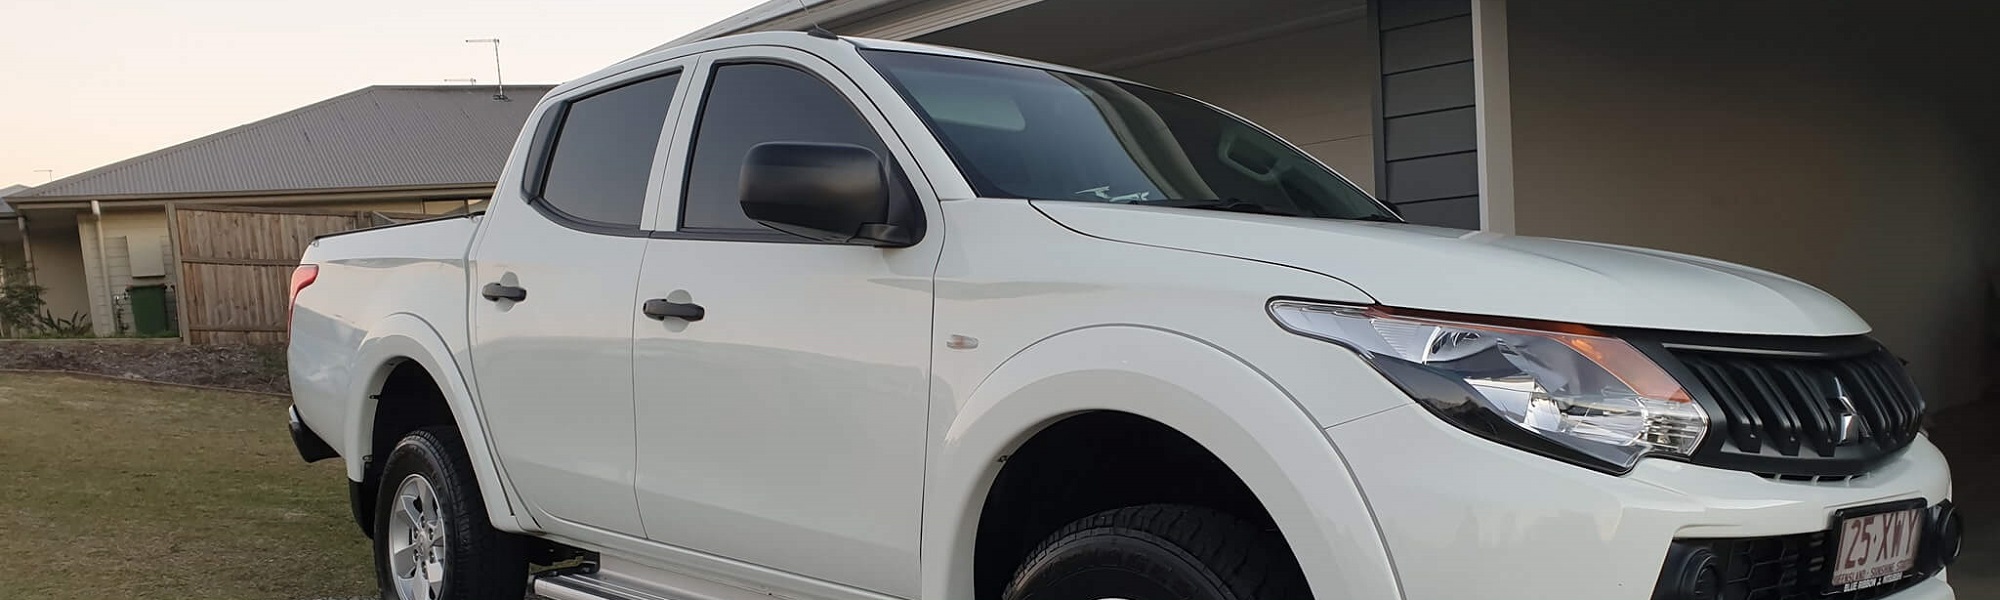 Mobile Window Tinting Brisbane Review Article